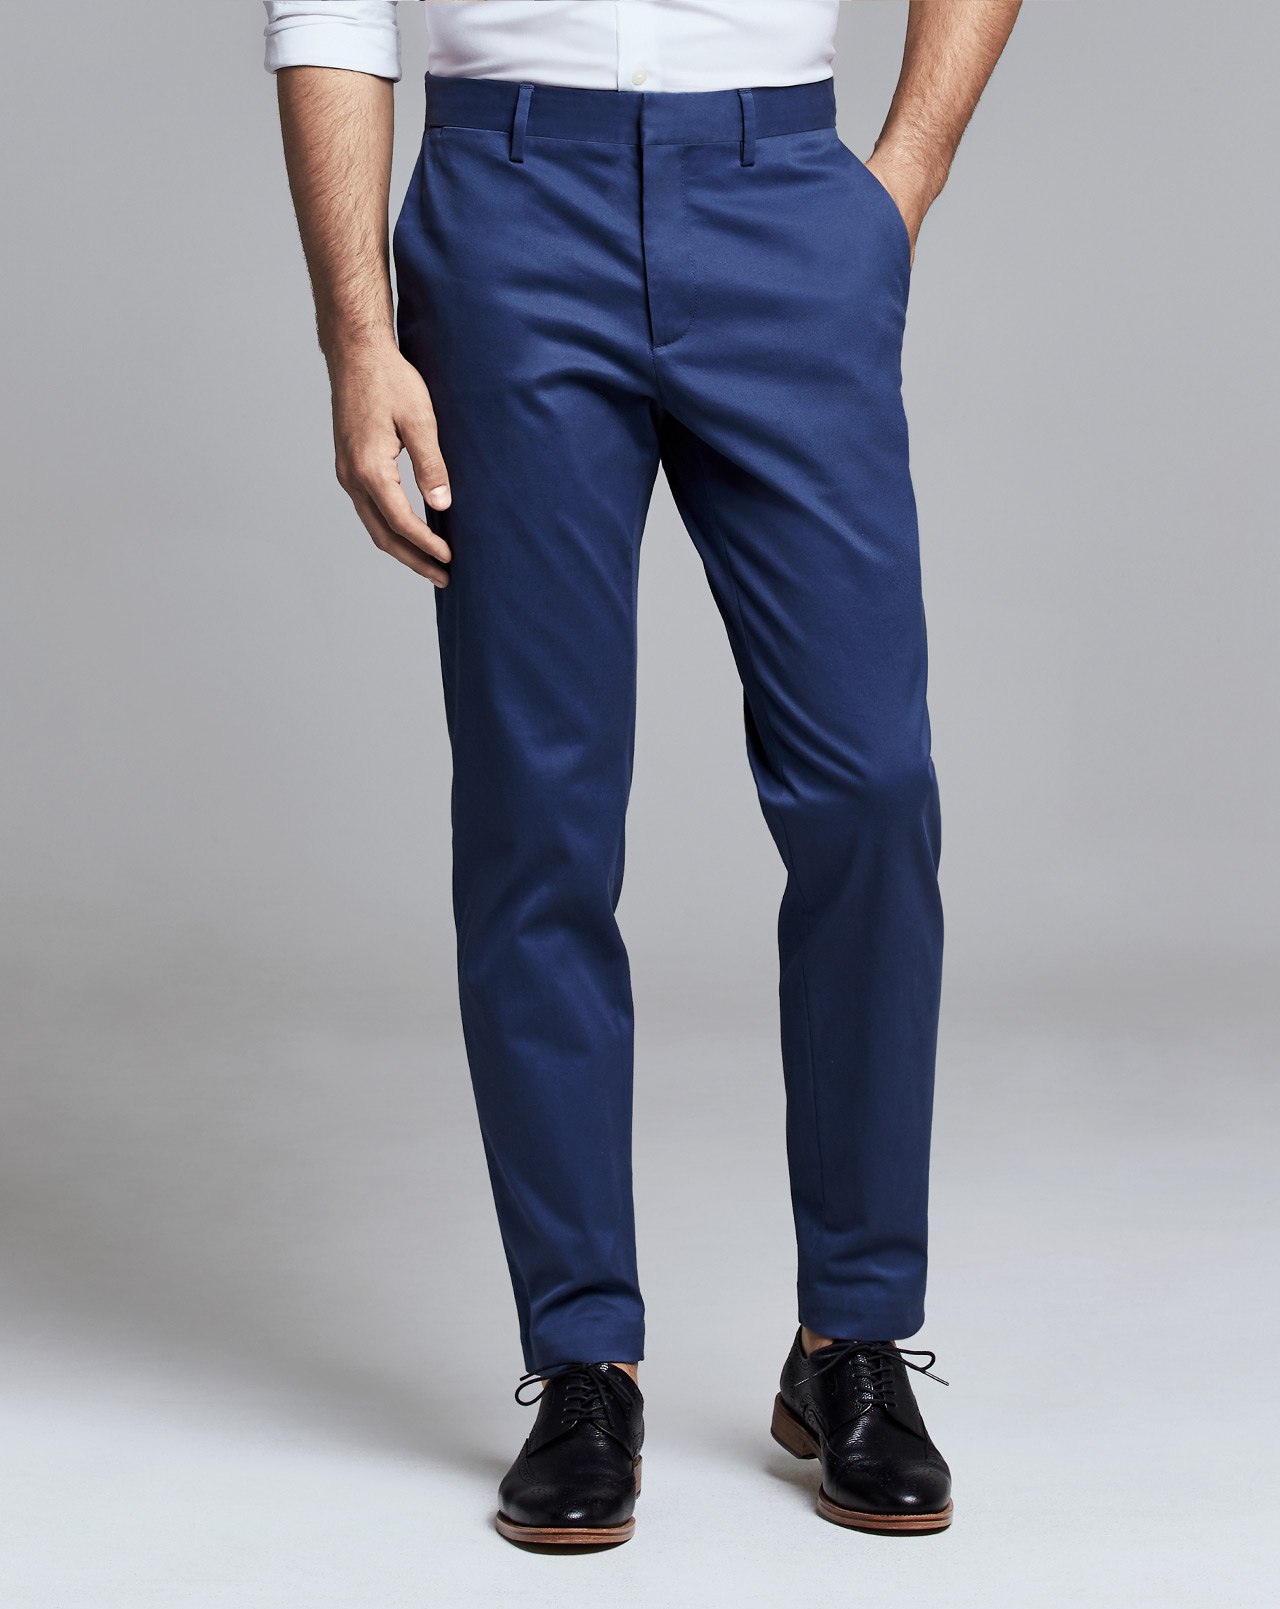 Fit Guide Men's Chinos - Mason